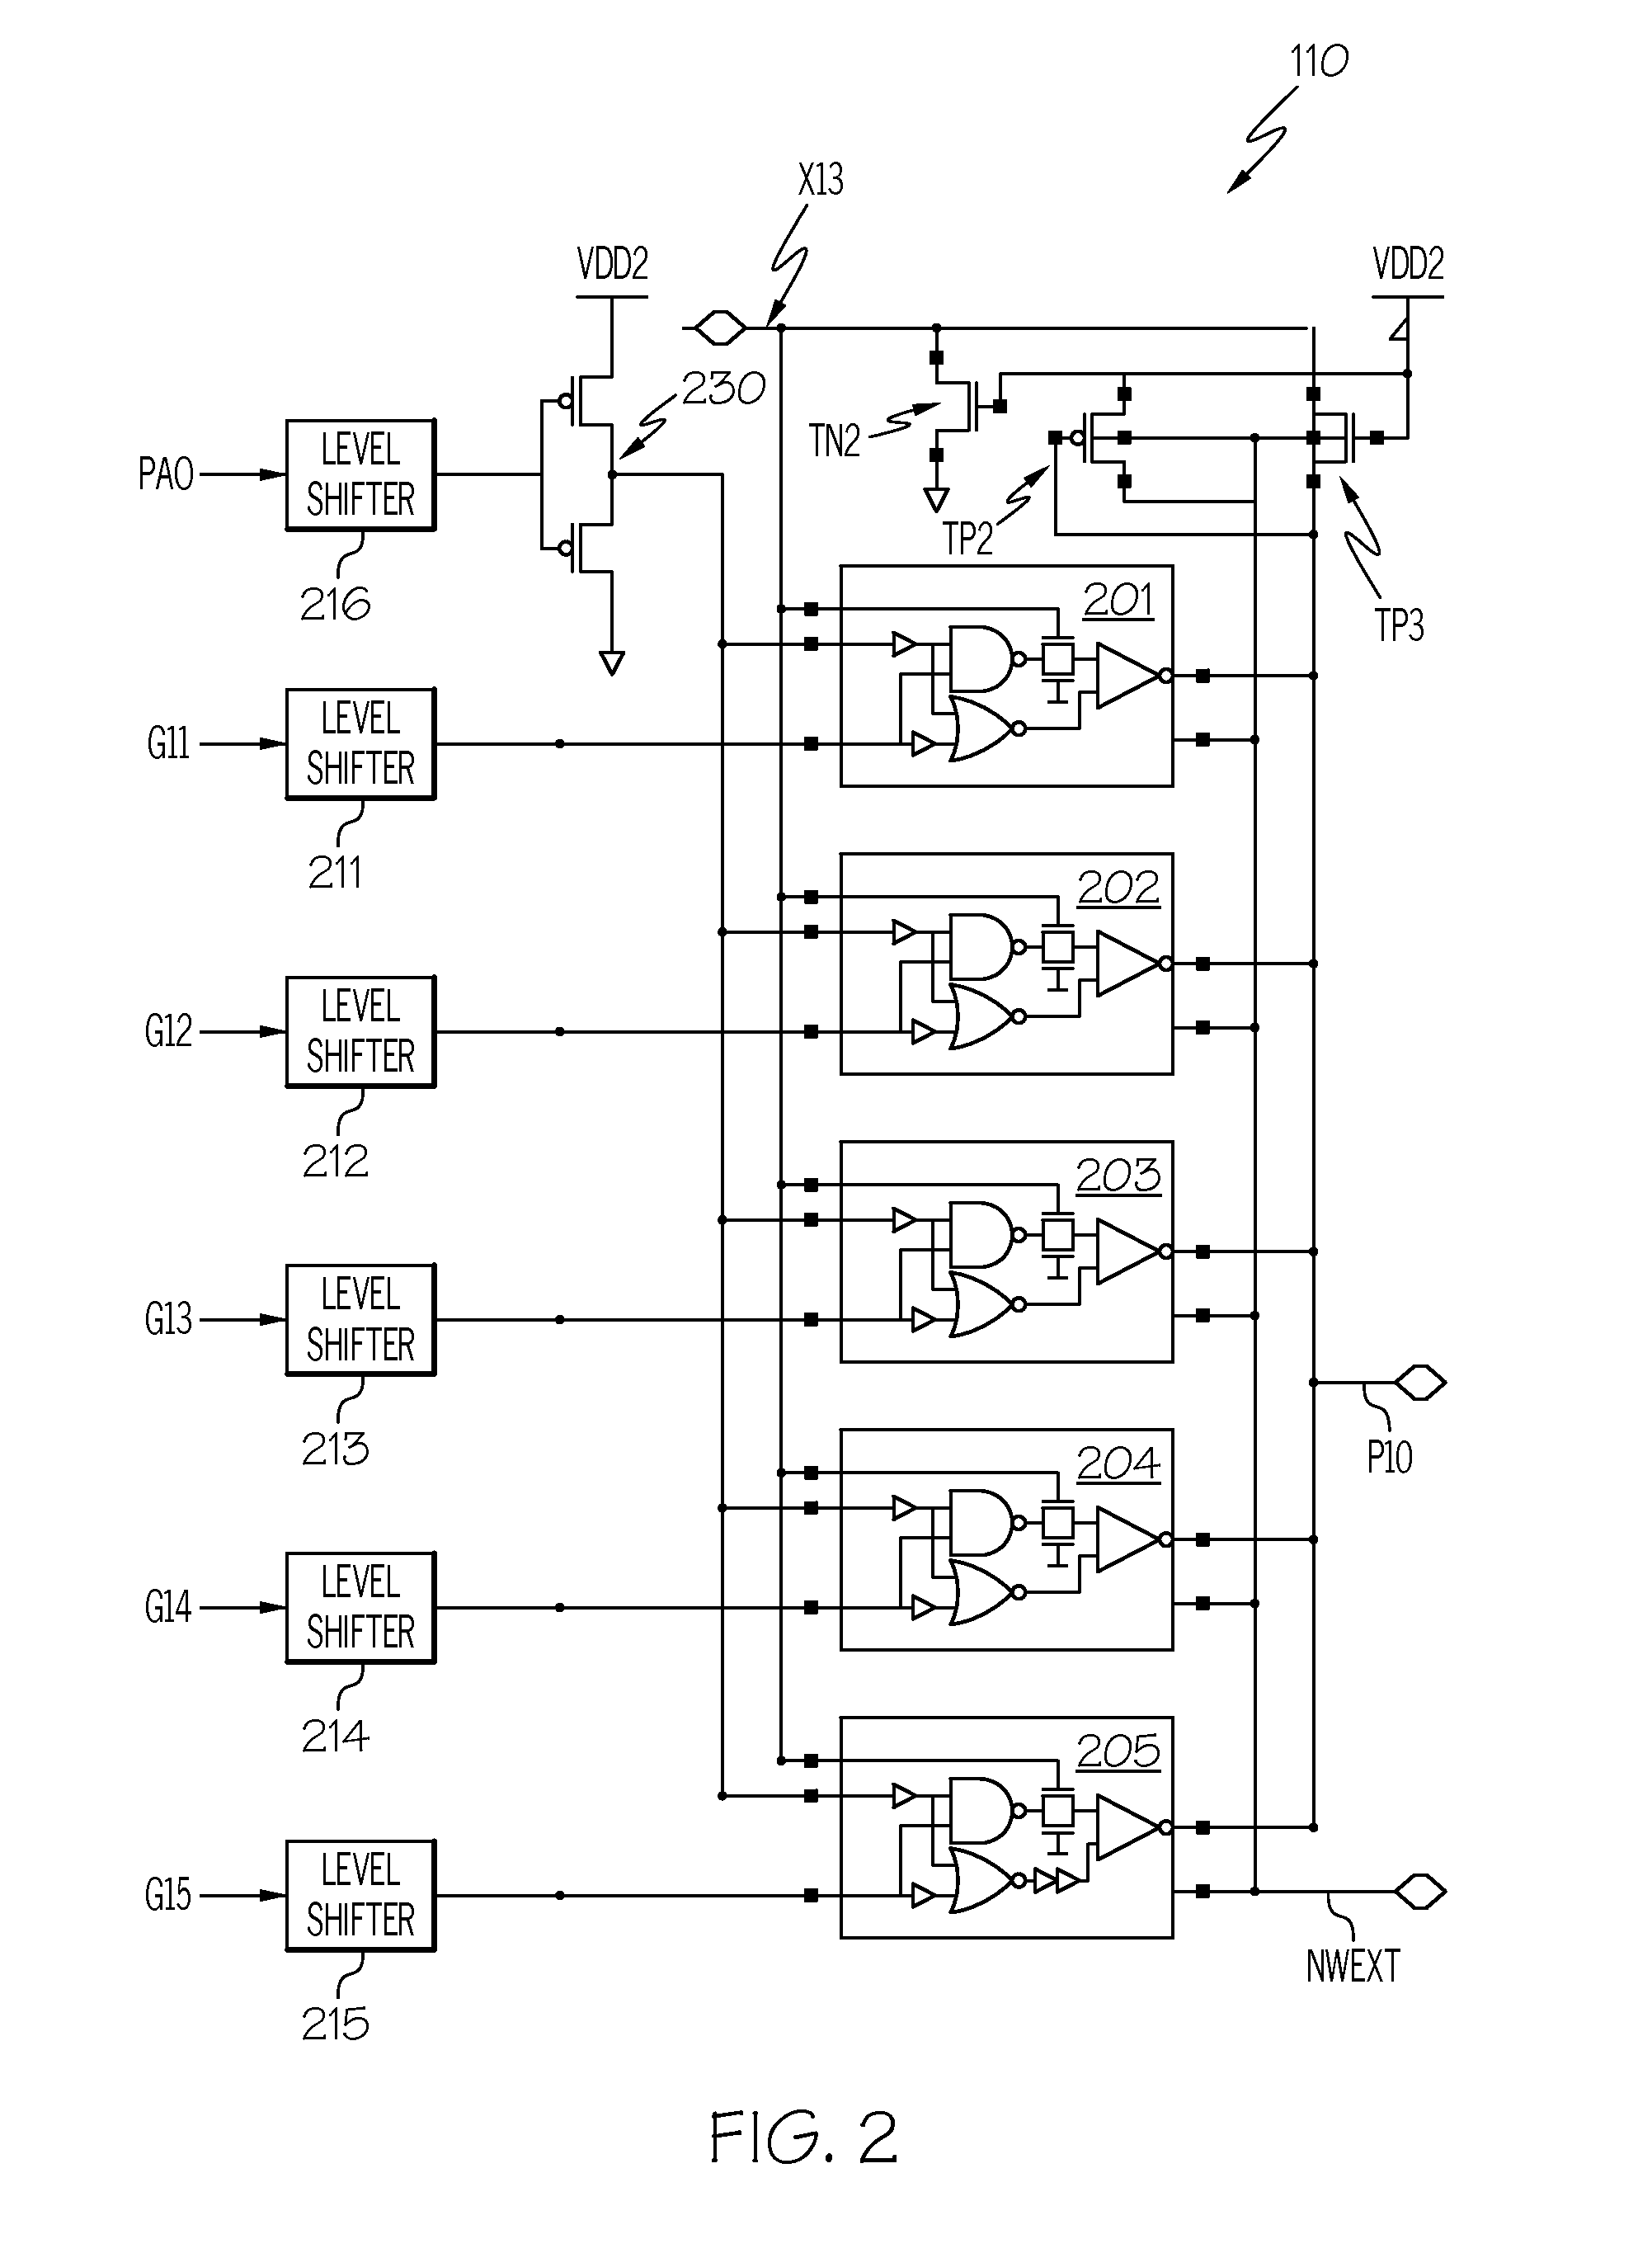 Programmable transceiver circuit